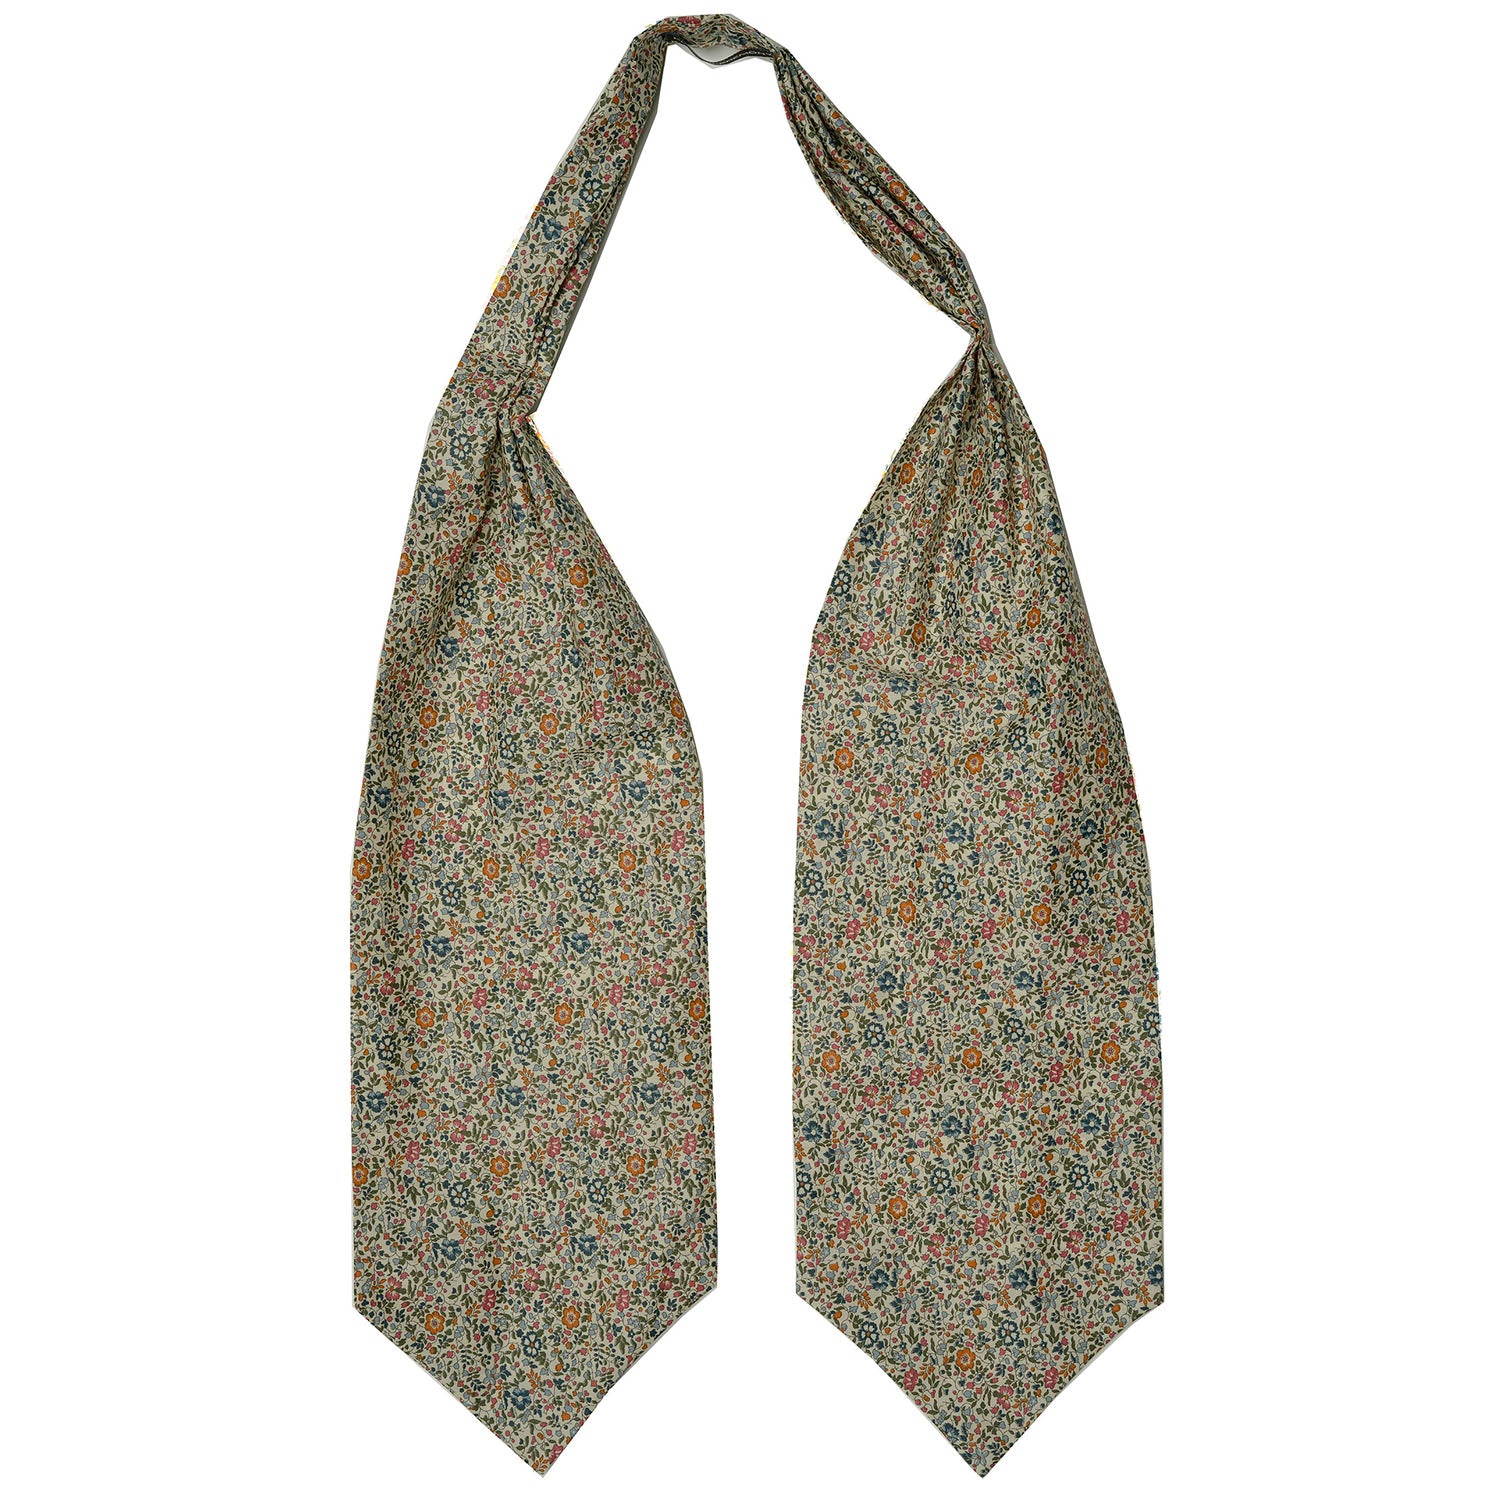 Liberty of London Katie and Millie Ascot